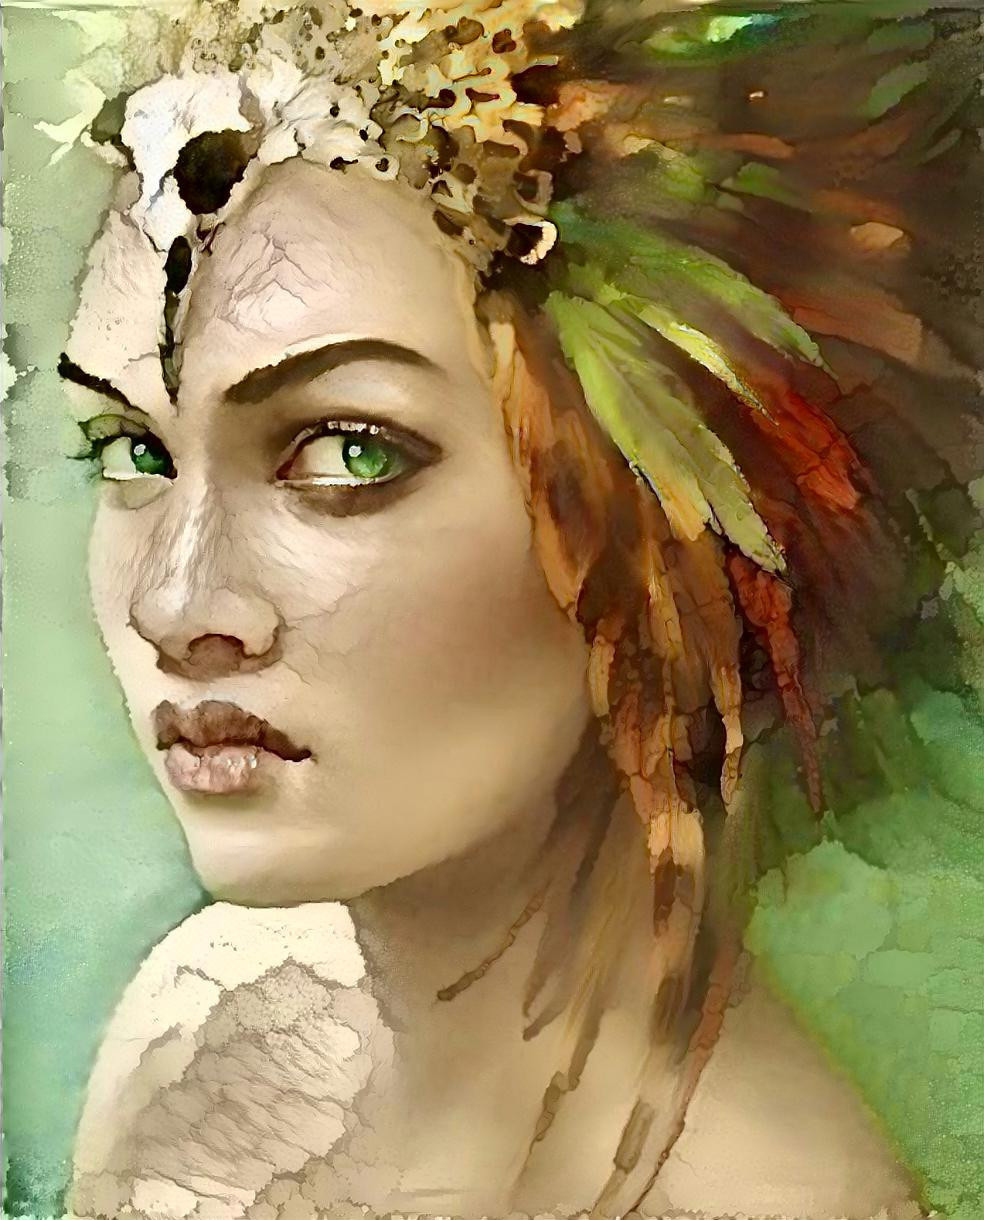 Her green eyes pinned my body against the canvas of Paris, staring into my soul like an enigmatic Heiress. ~DWH~ image artwork courtesy of Melanie Delon.